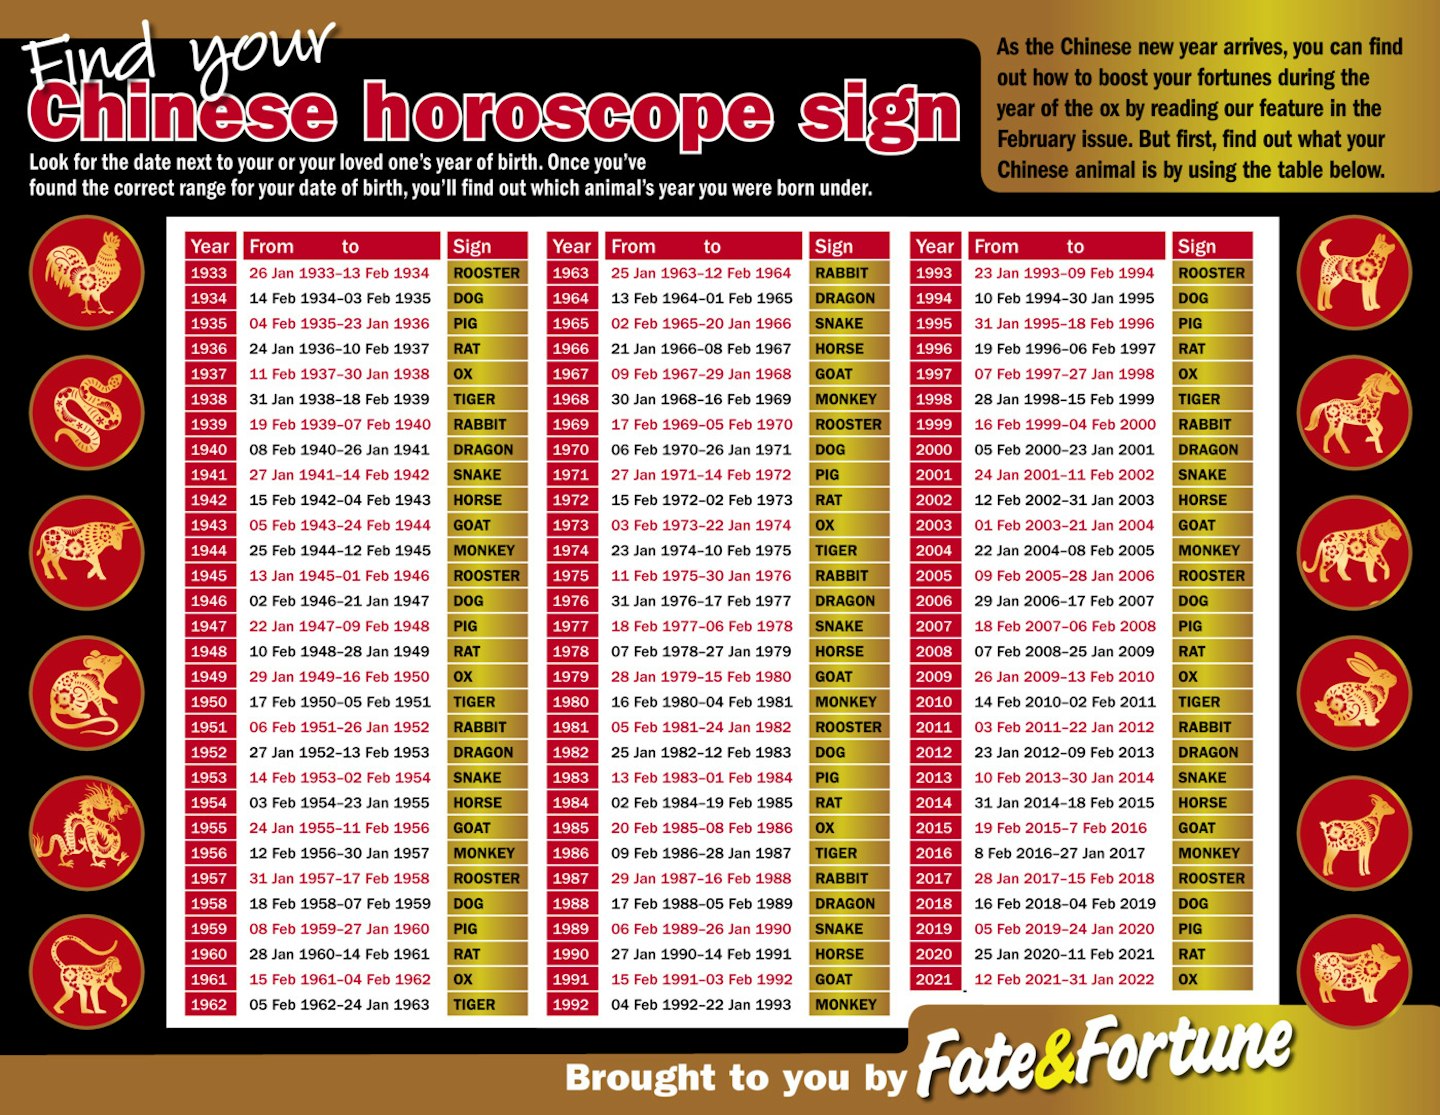 What's your Chinese horoscope sign?